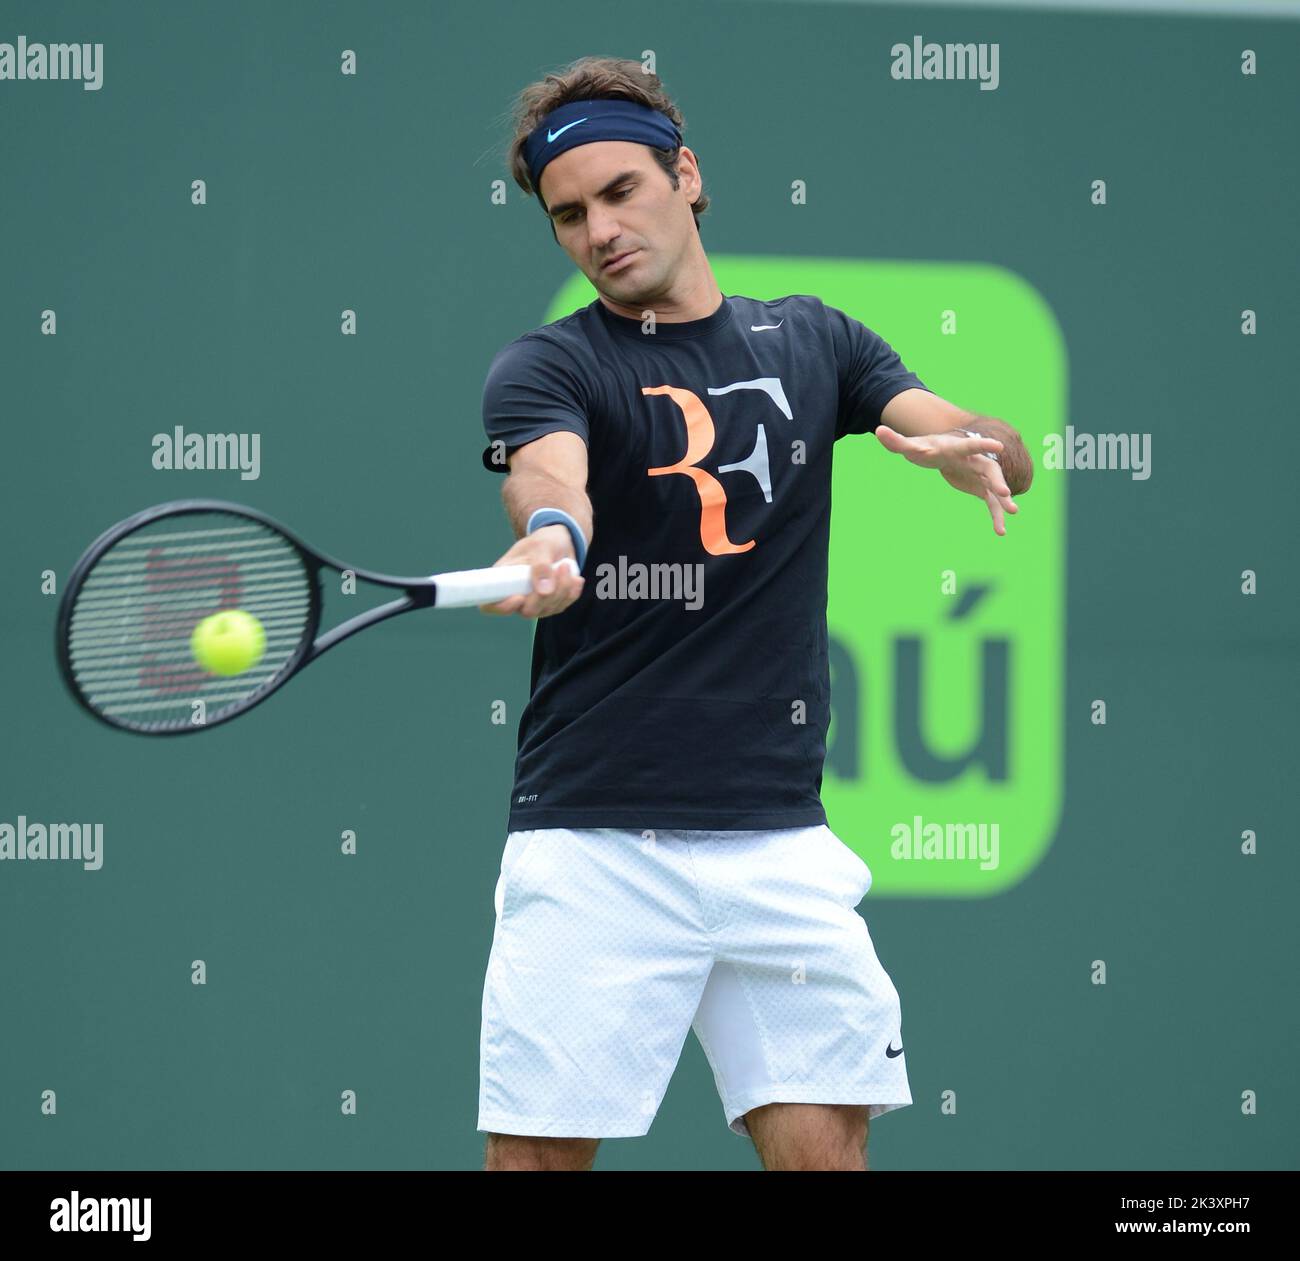 KEY BISCAYNE, FL - MARCH 18: Roger Federer of Switzerland practicing ahead of the Sony Open at Crandon Park Tennis Center on March 18, 2014 in Key Biscayne, Florida.  People:  Roger Federer Stock Photo